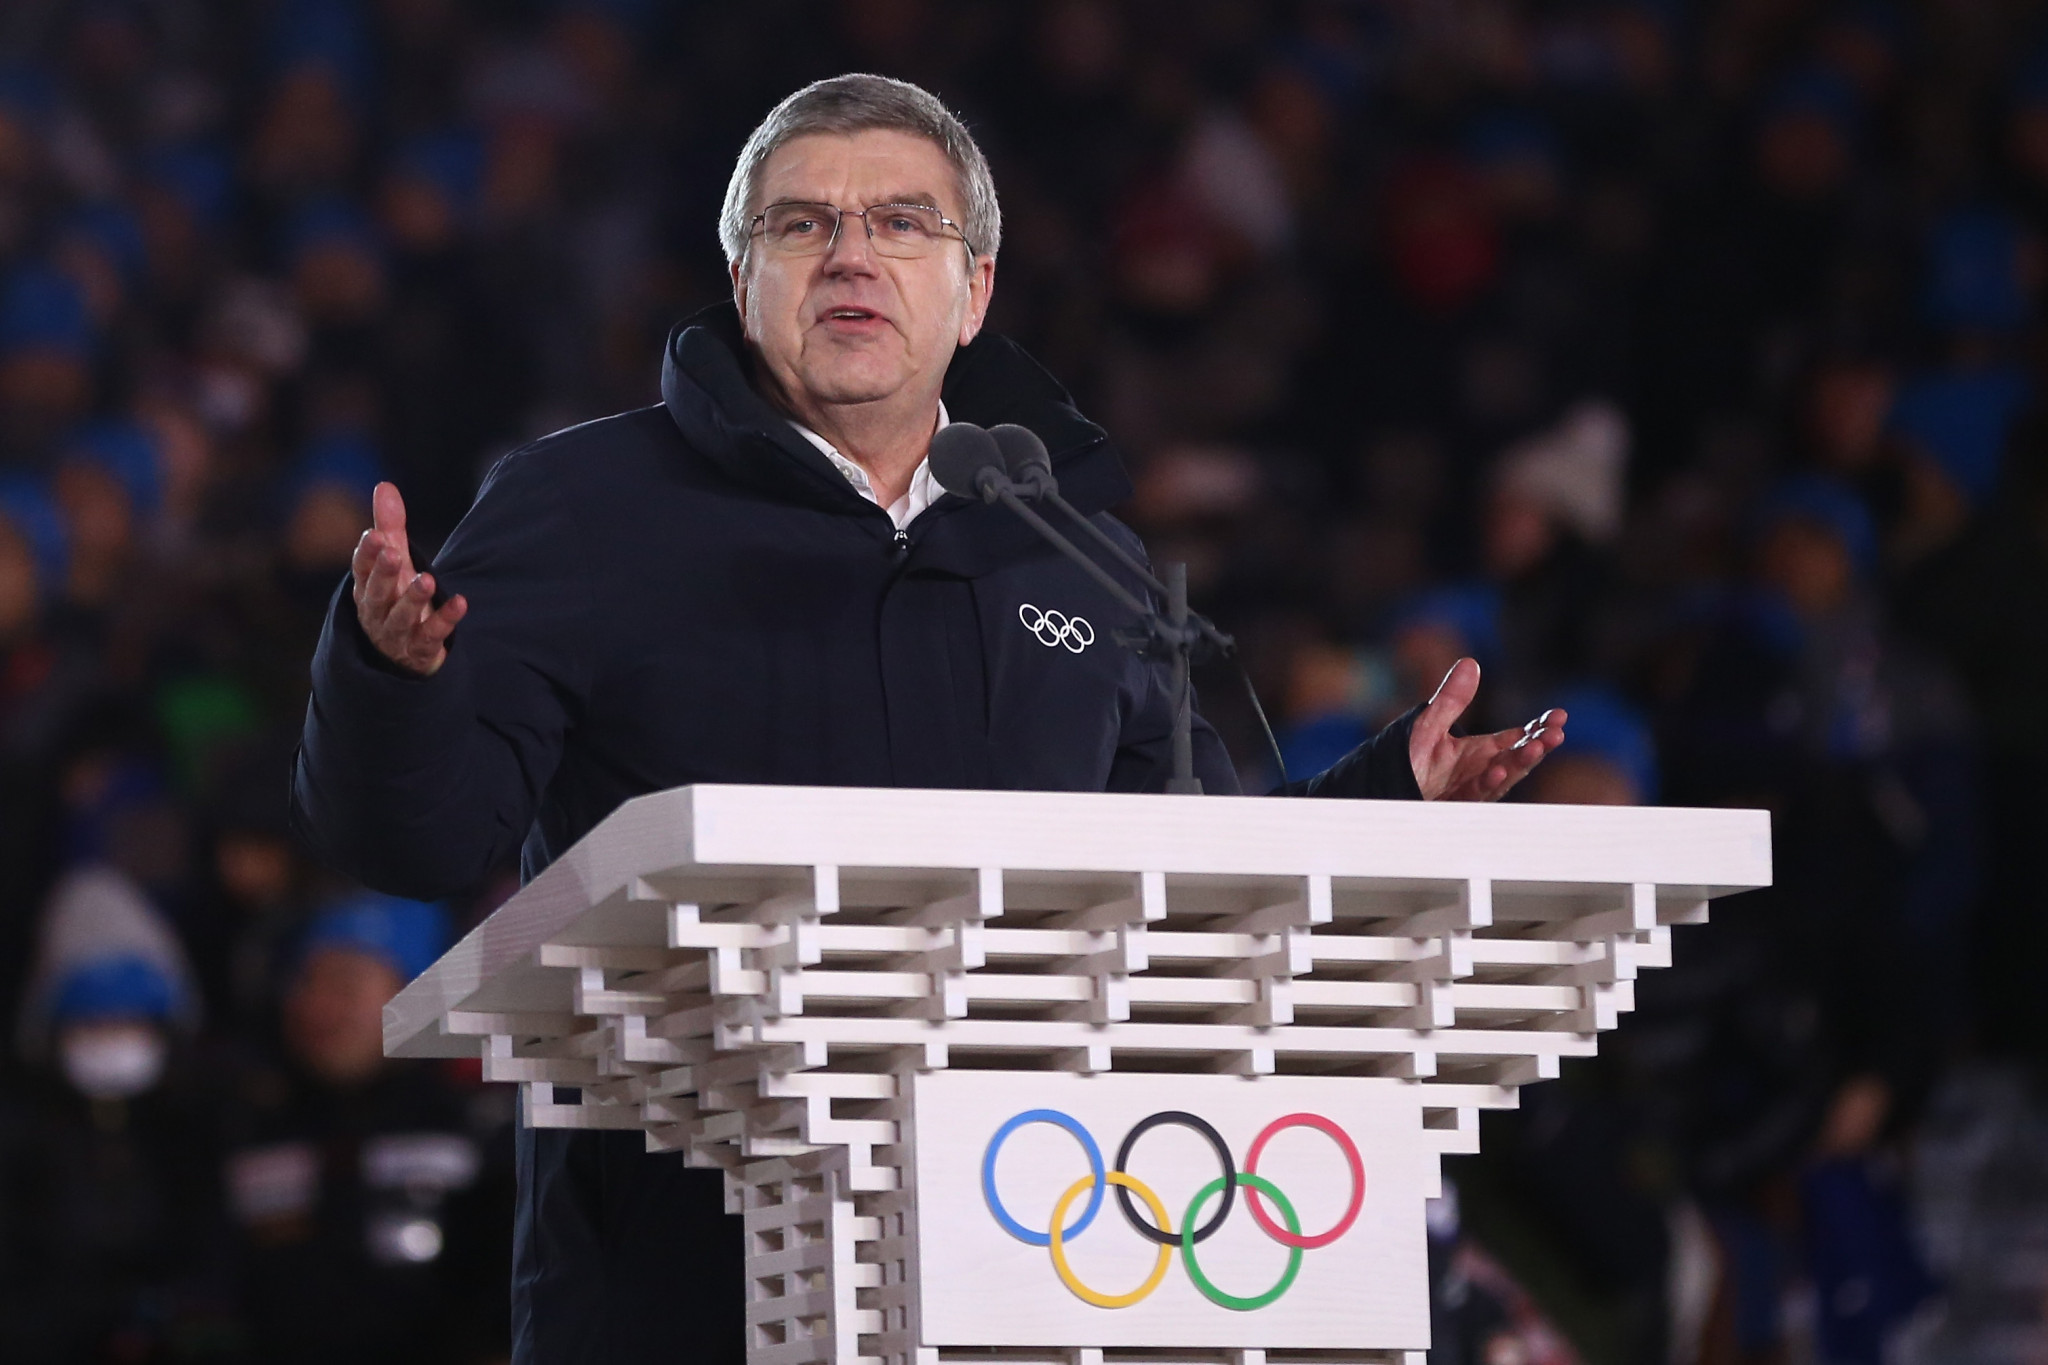 IOC President Thomas Bach officially declared the Pyeongchang 2018 Winter Olympics closed ©Getty Images